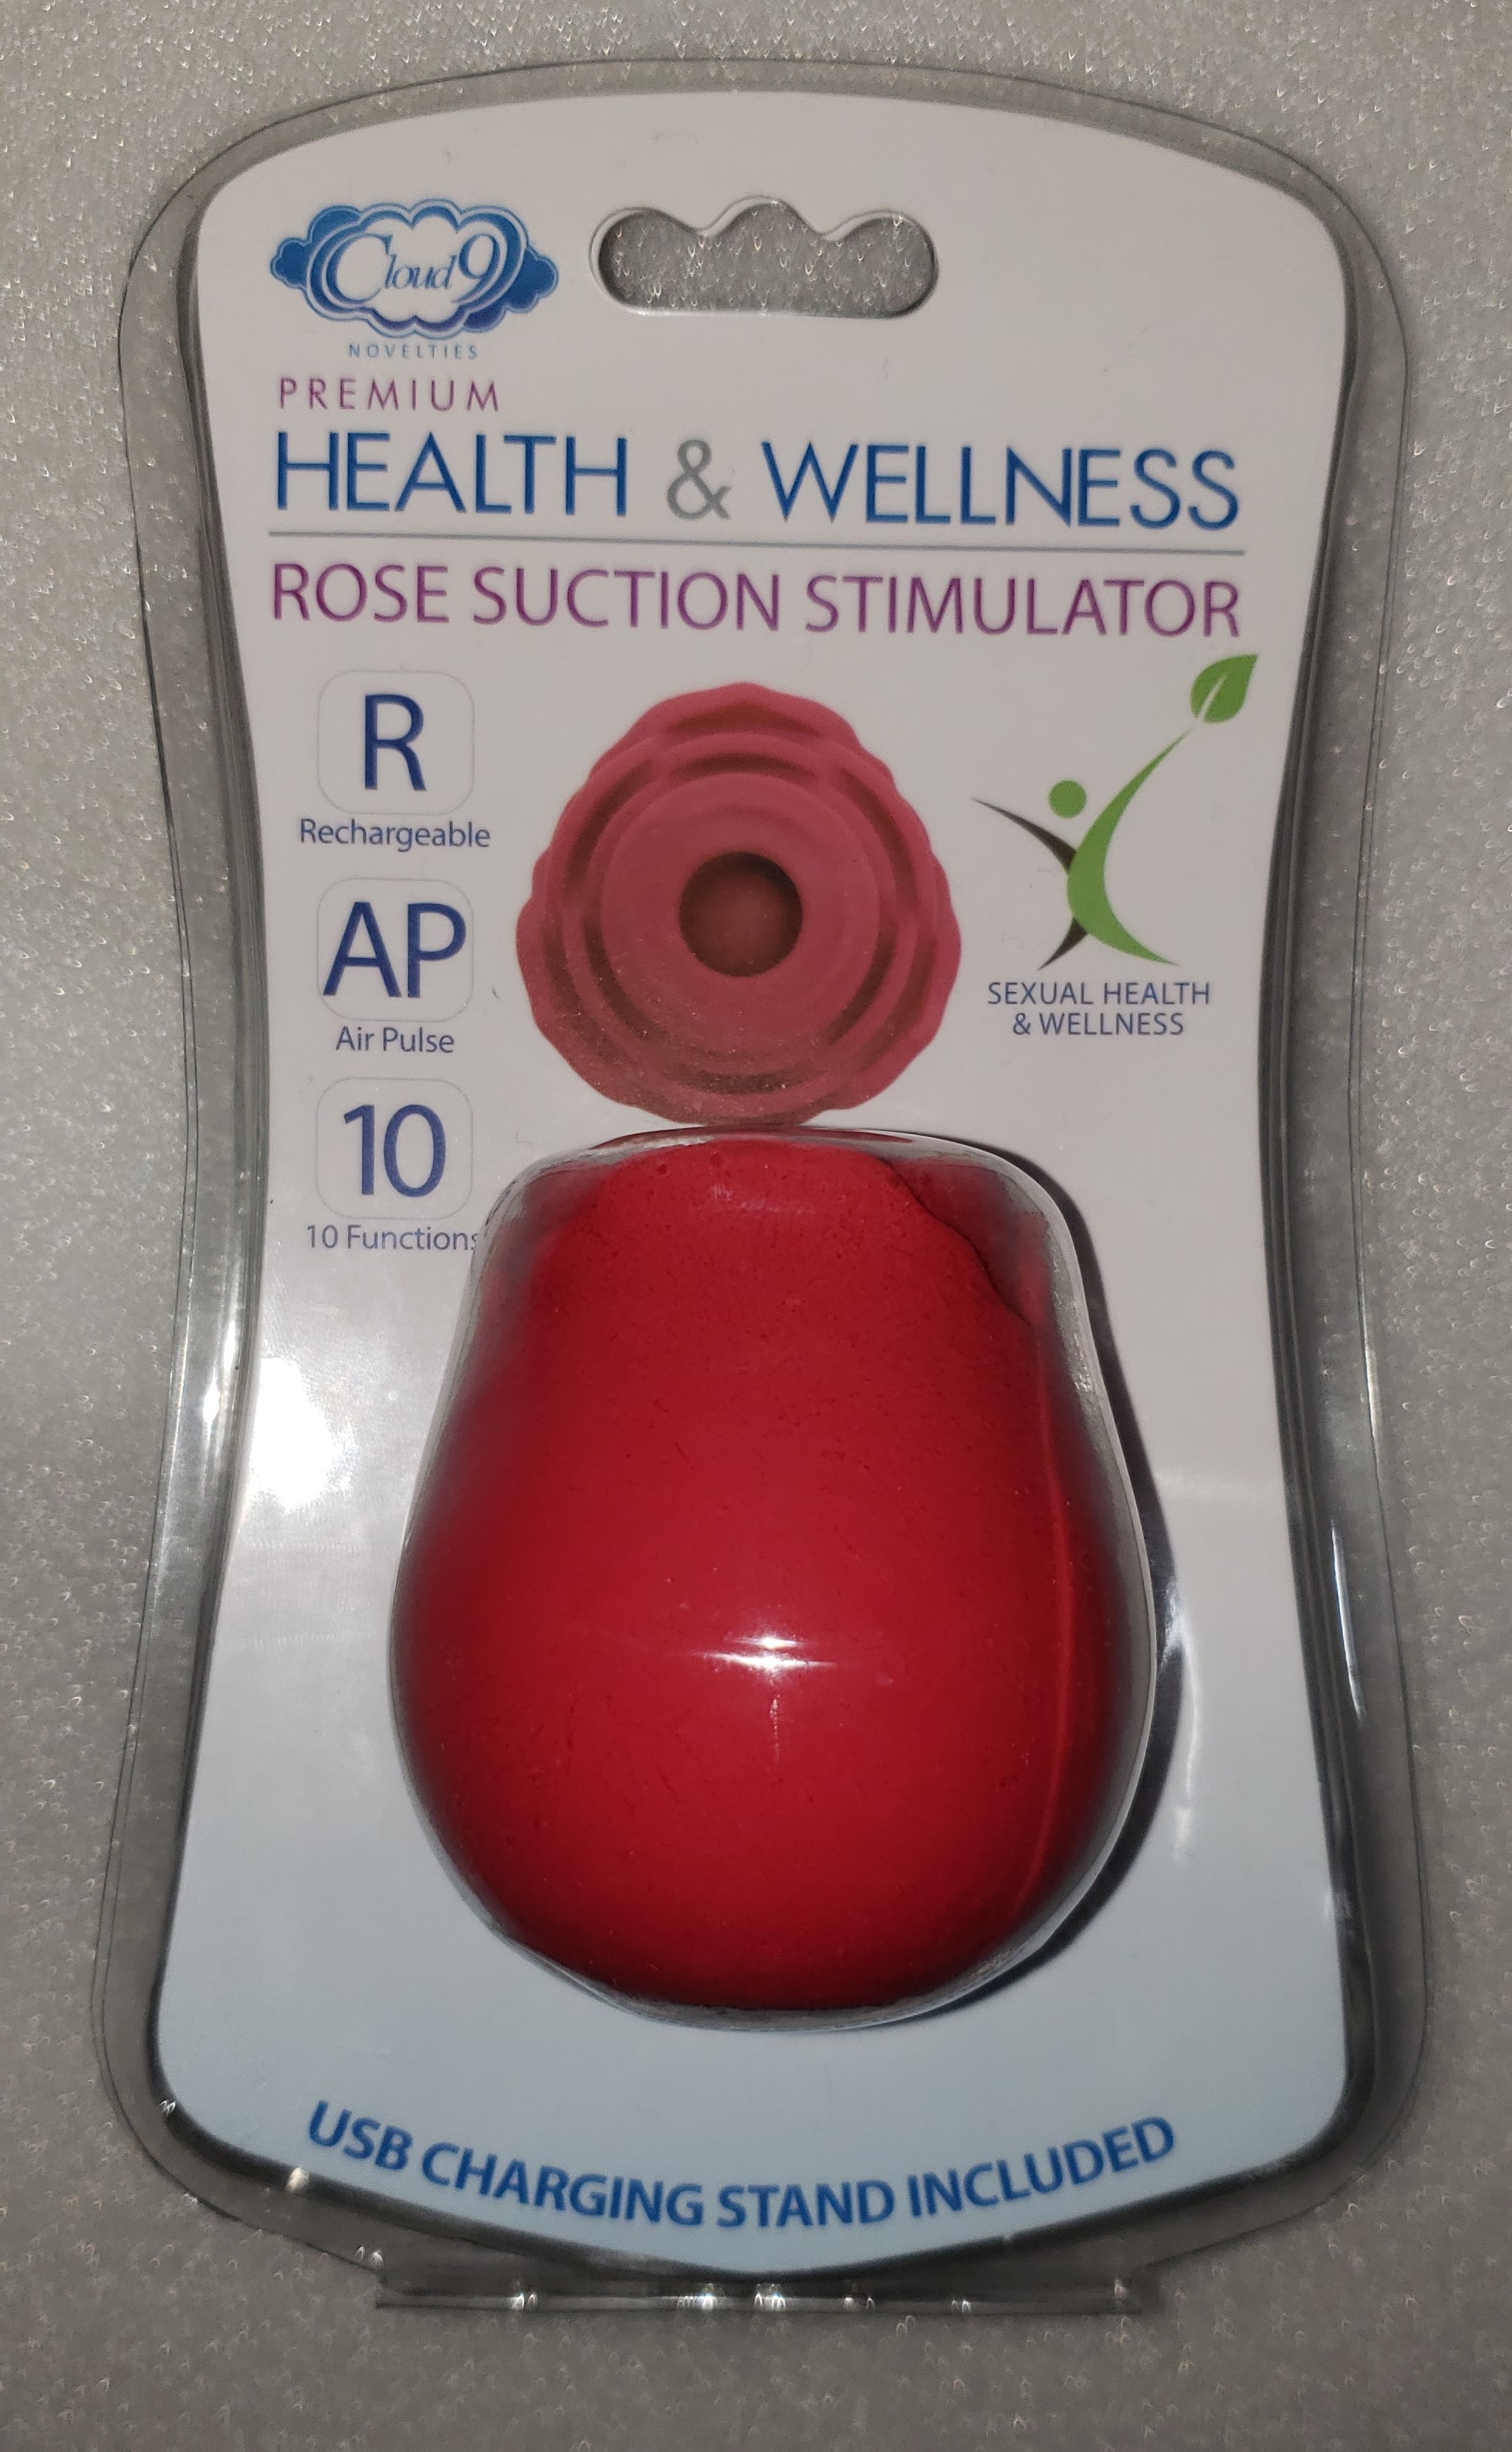 The Rose Suction Stimulator: Photo of the rose toy in clear plastic clamshell packaging. The text on the package reads "Health & Wellness Rose Suction Stimulator" in large block letters.